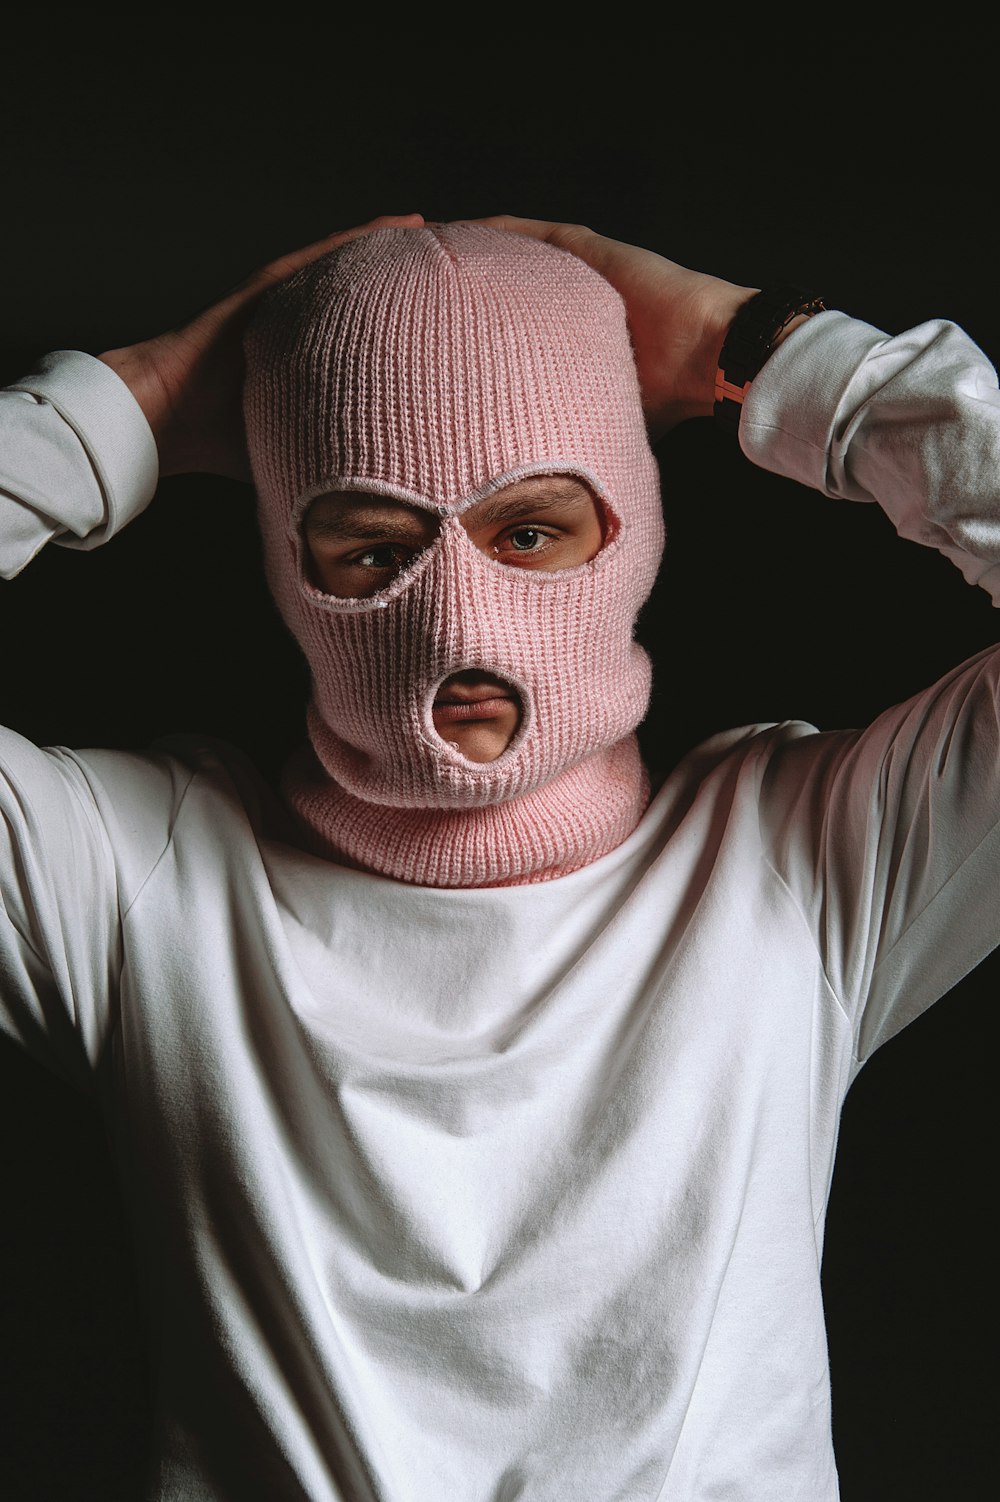 Balaclava Pictures | Download Free Images on Unsplash